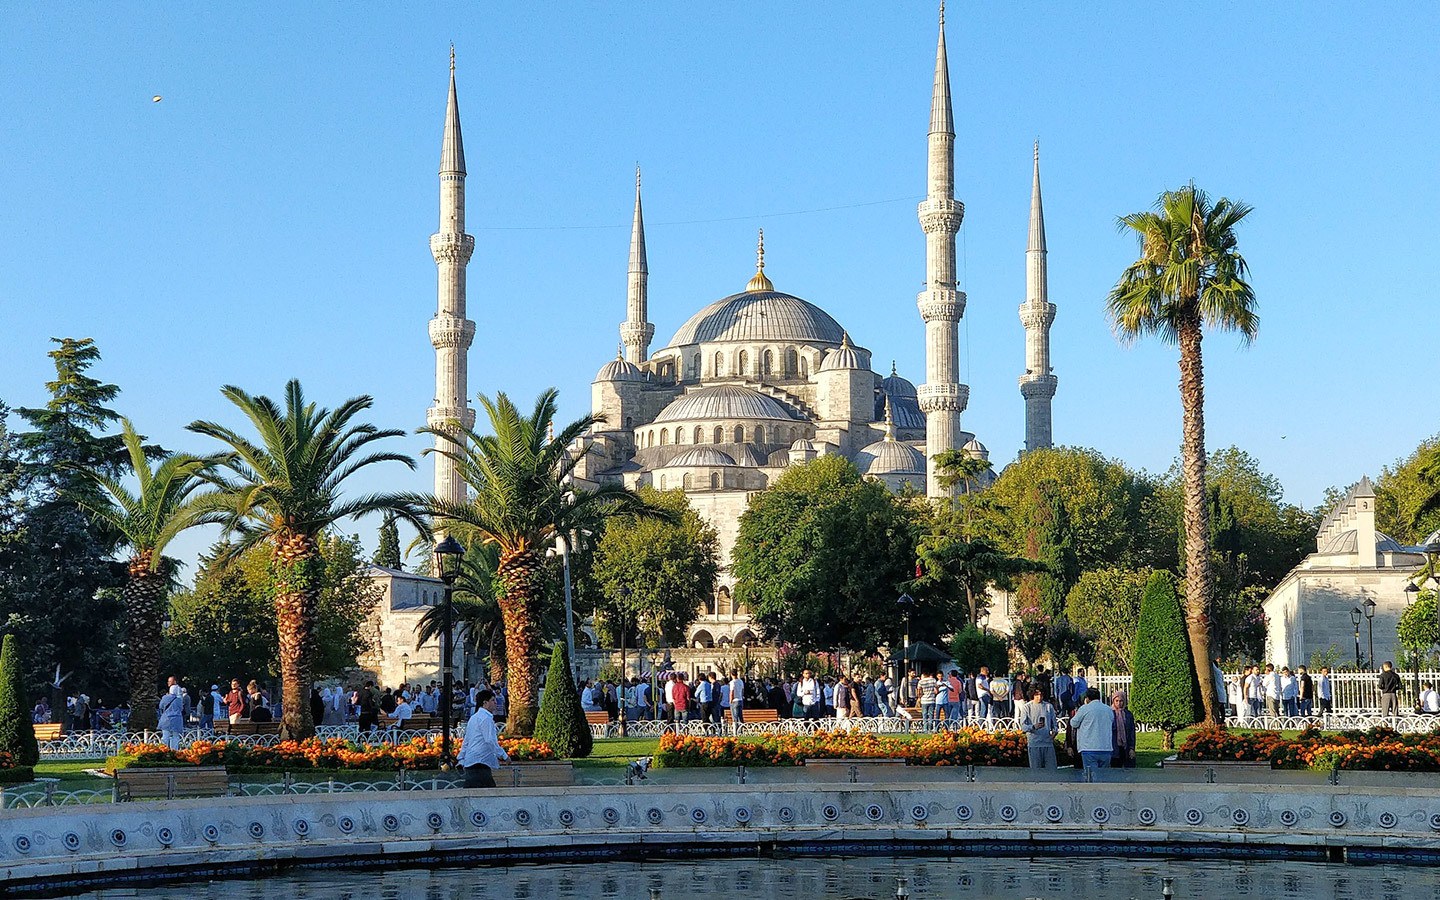 The Sultan Ahmed Mosque – or Blue Mosque – in Sultanahmet